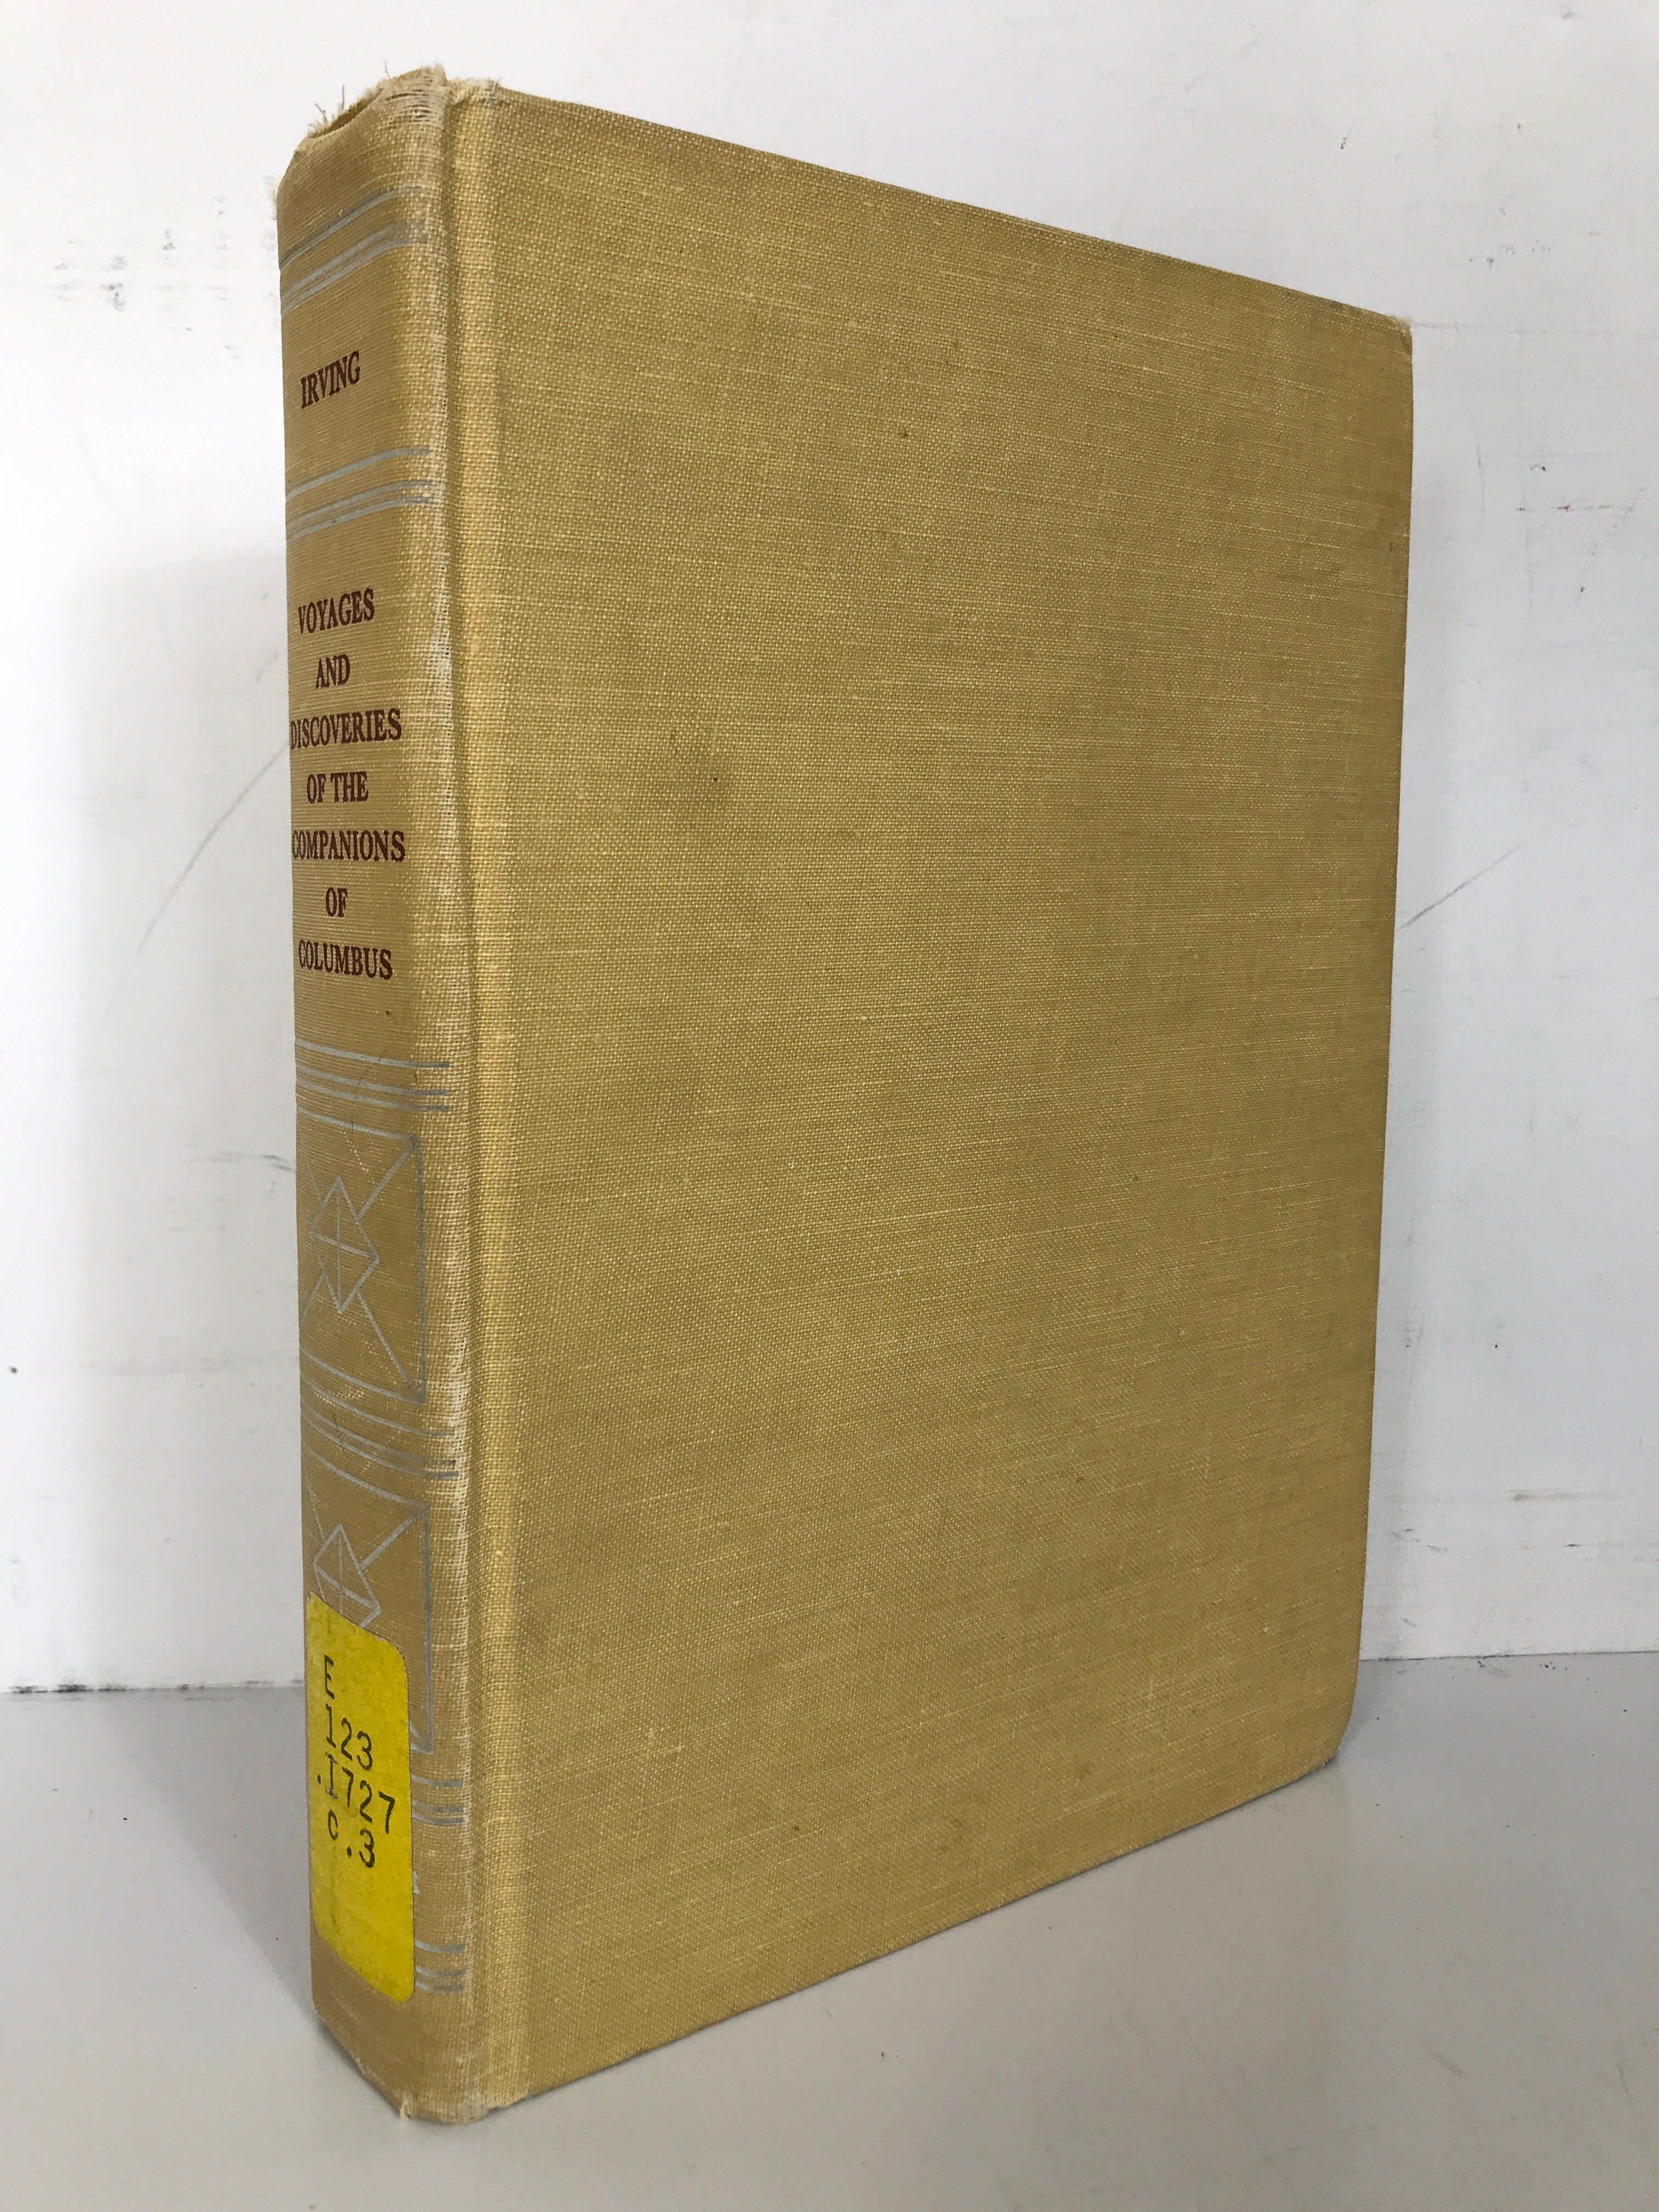 Voyages and Discoveries of the Companions of Columbus Washington Irving 1960 HC